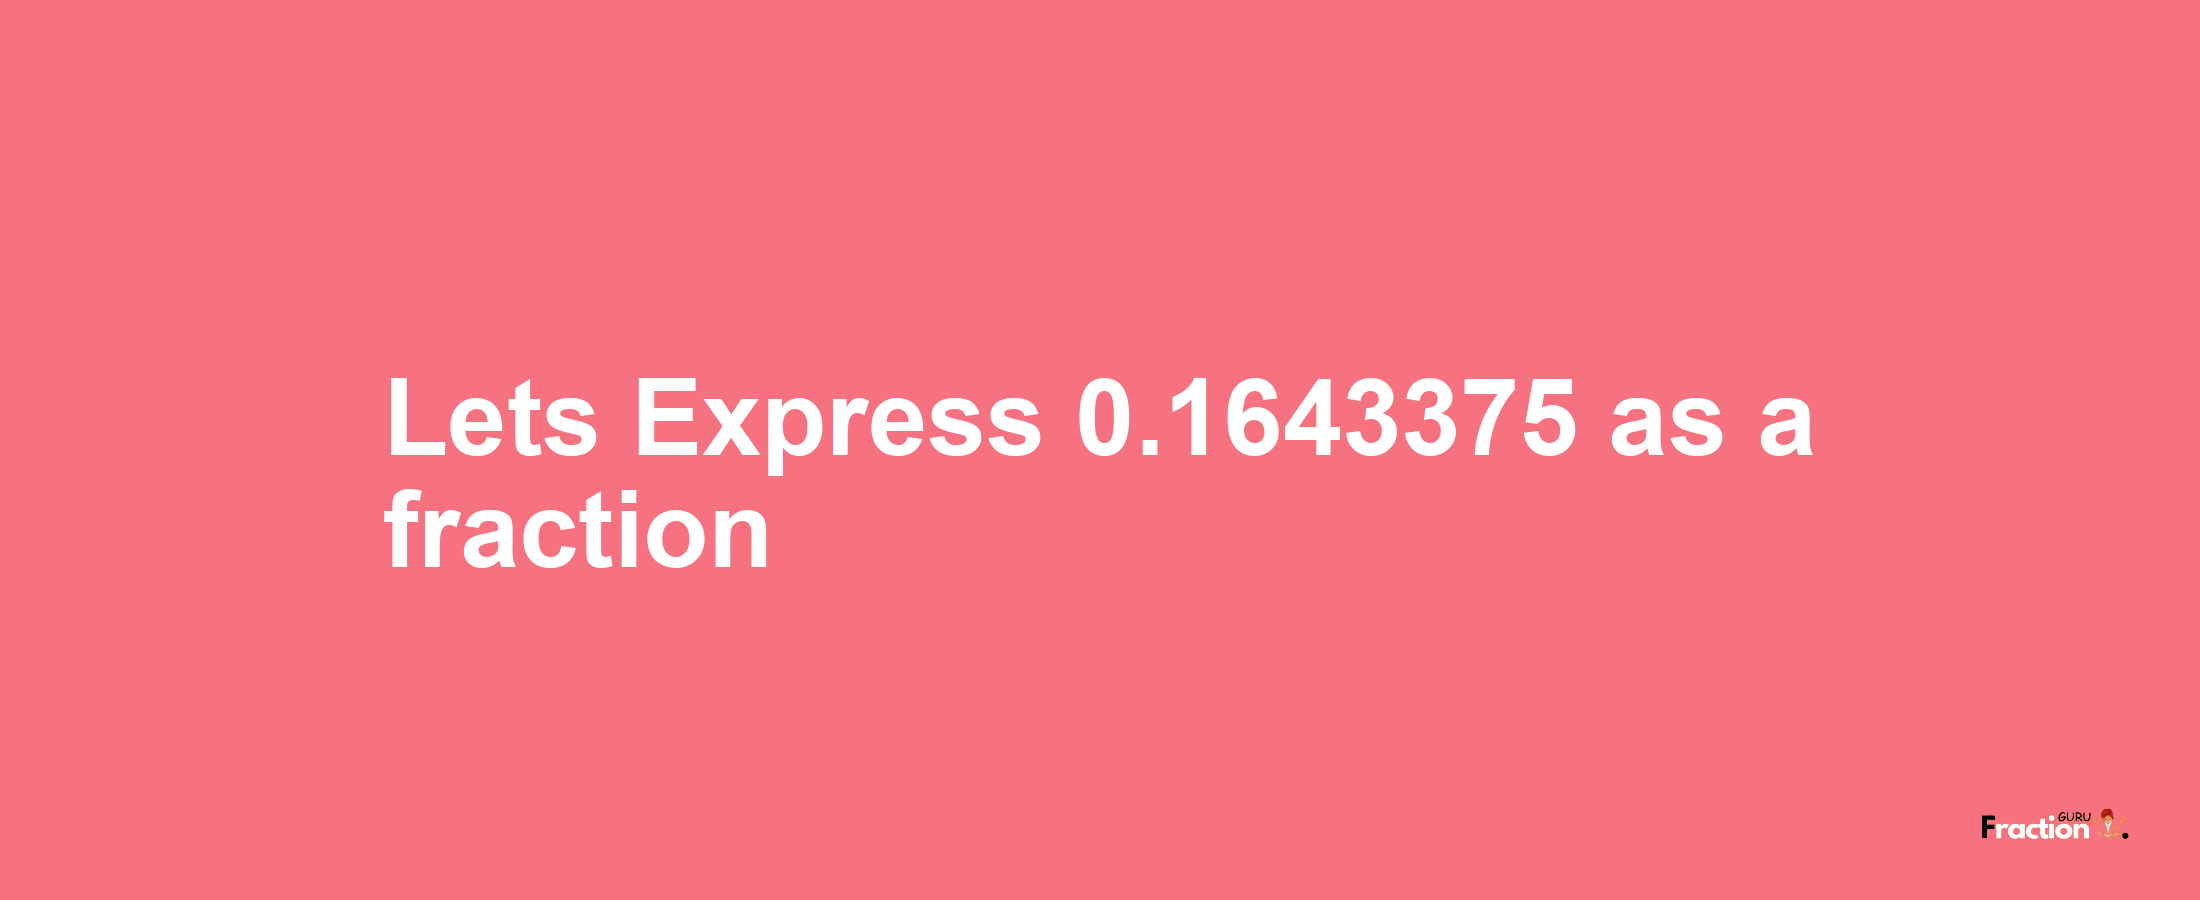 Lets Express 0.1643375 as afraction